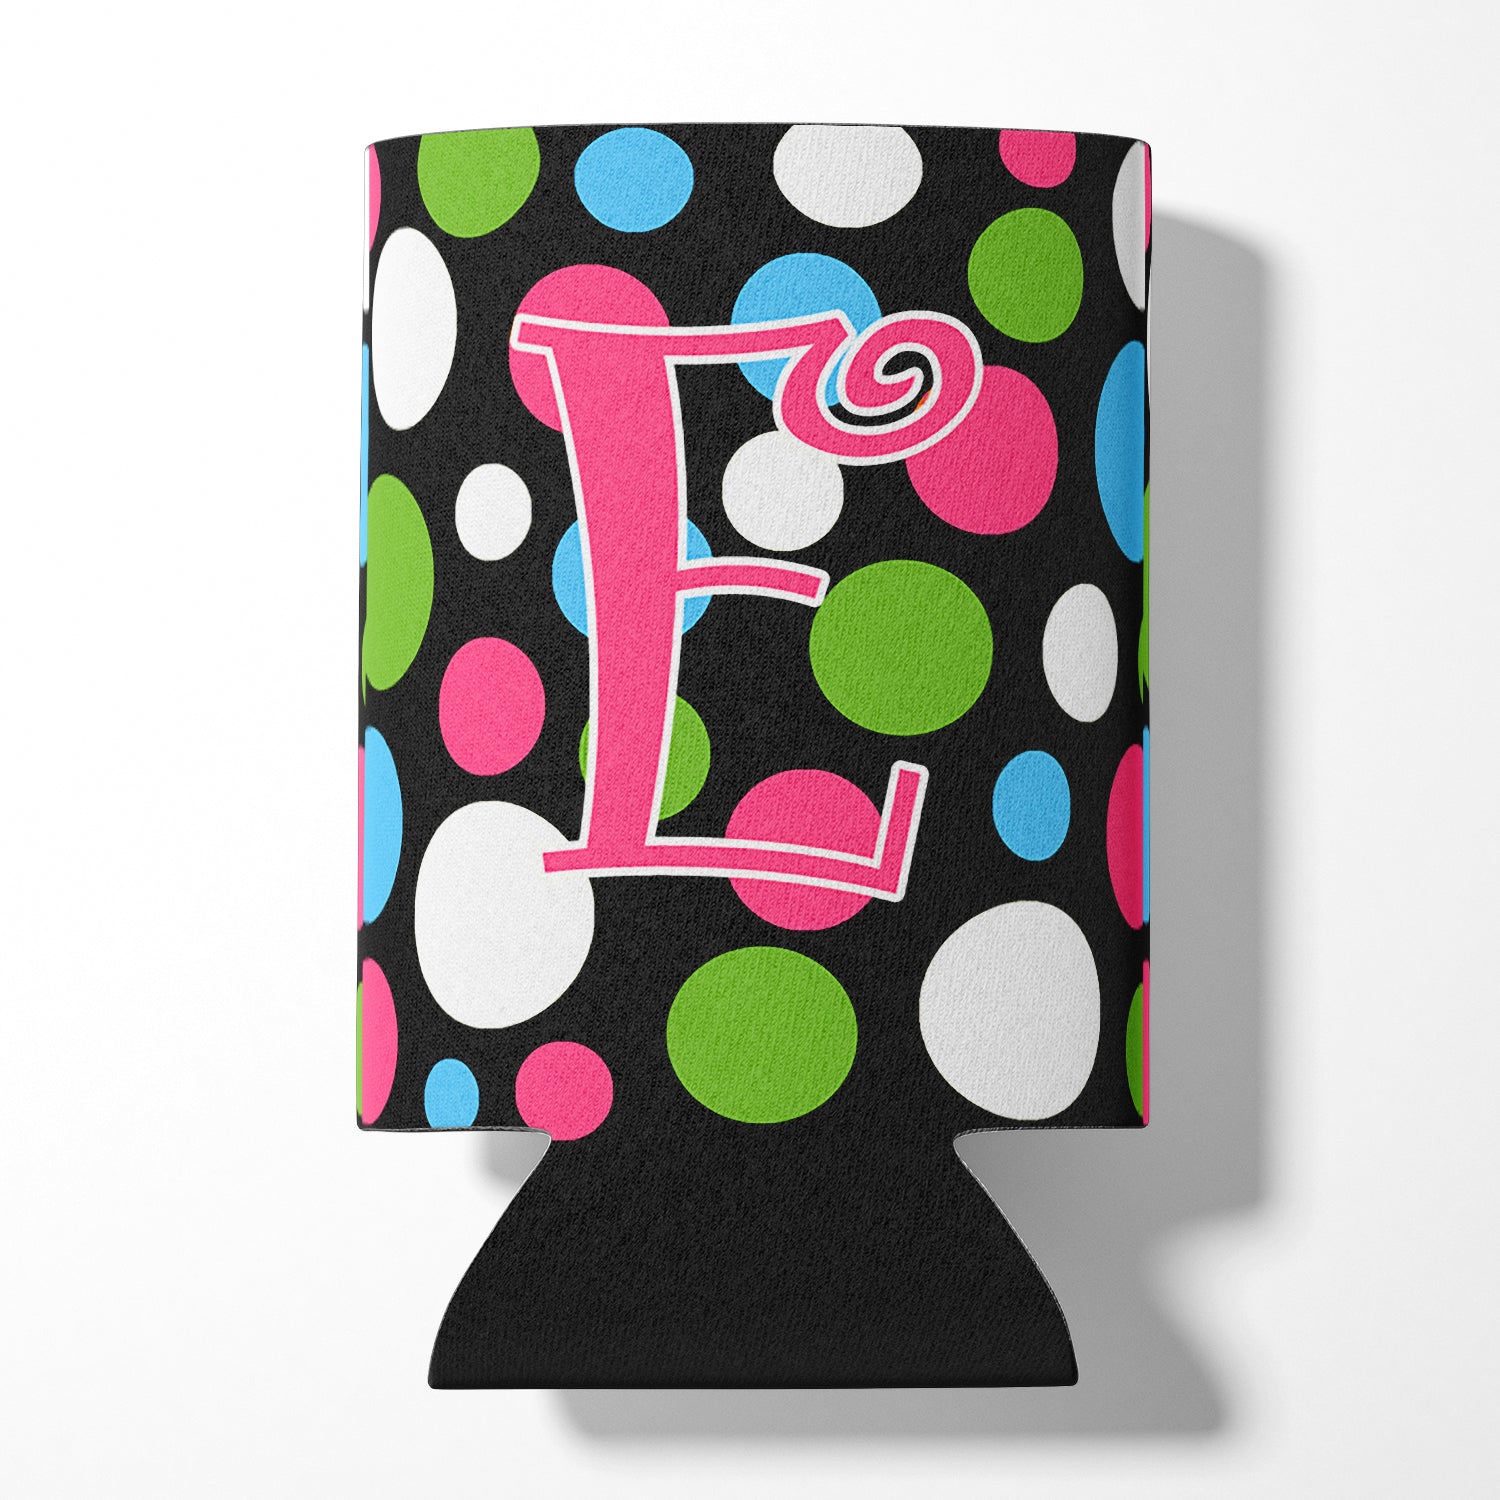 Letter E Initial Monogram - Polkadots and Pink Can or Bottle Beverage Insulator Hugger.